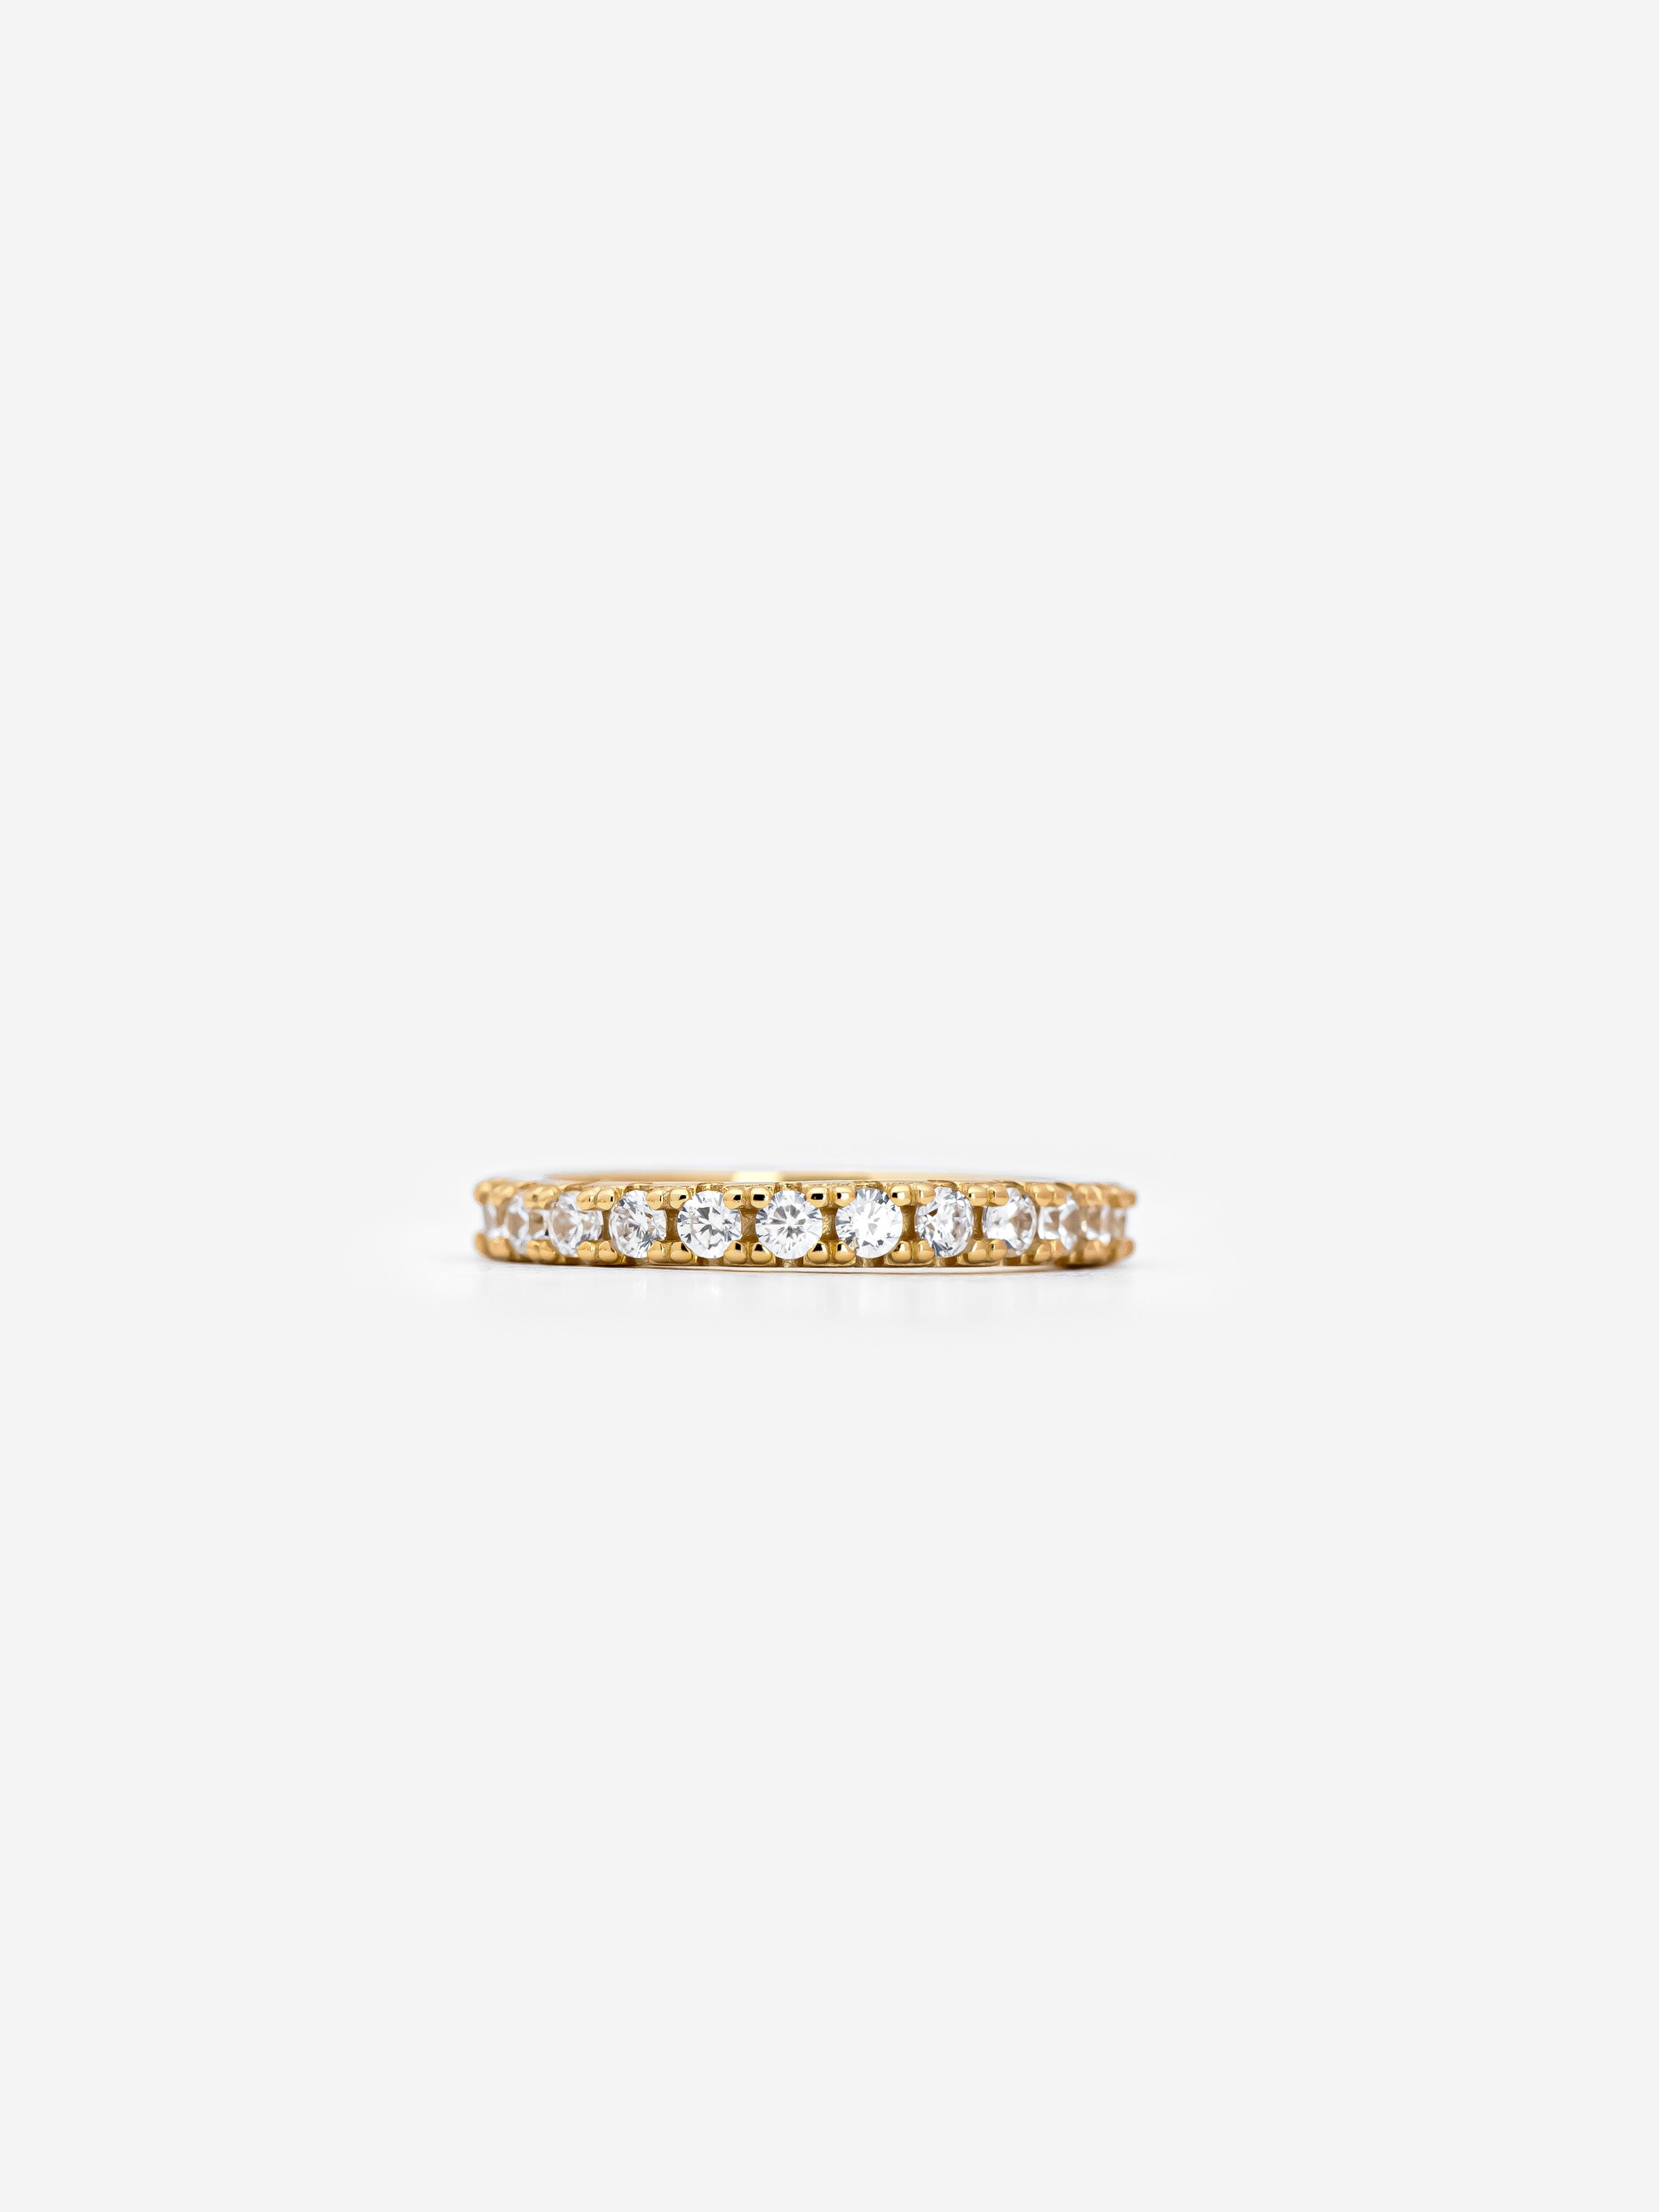 Stacking Eternity Ring With Cubic Zirconia Stones